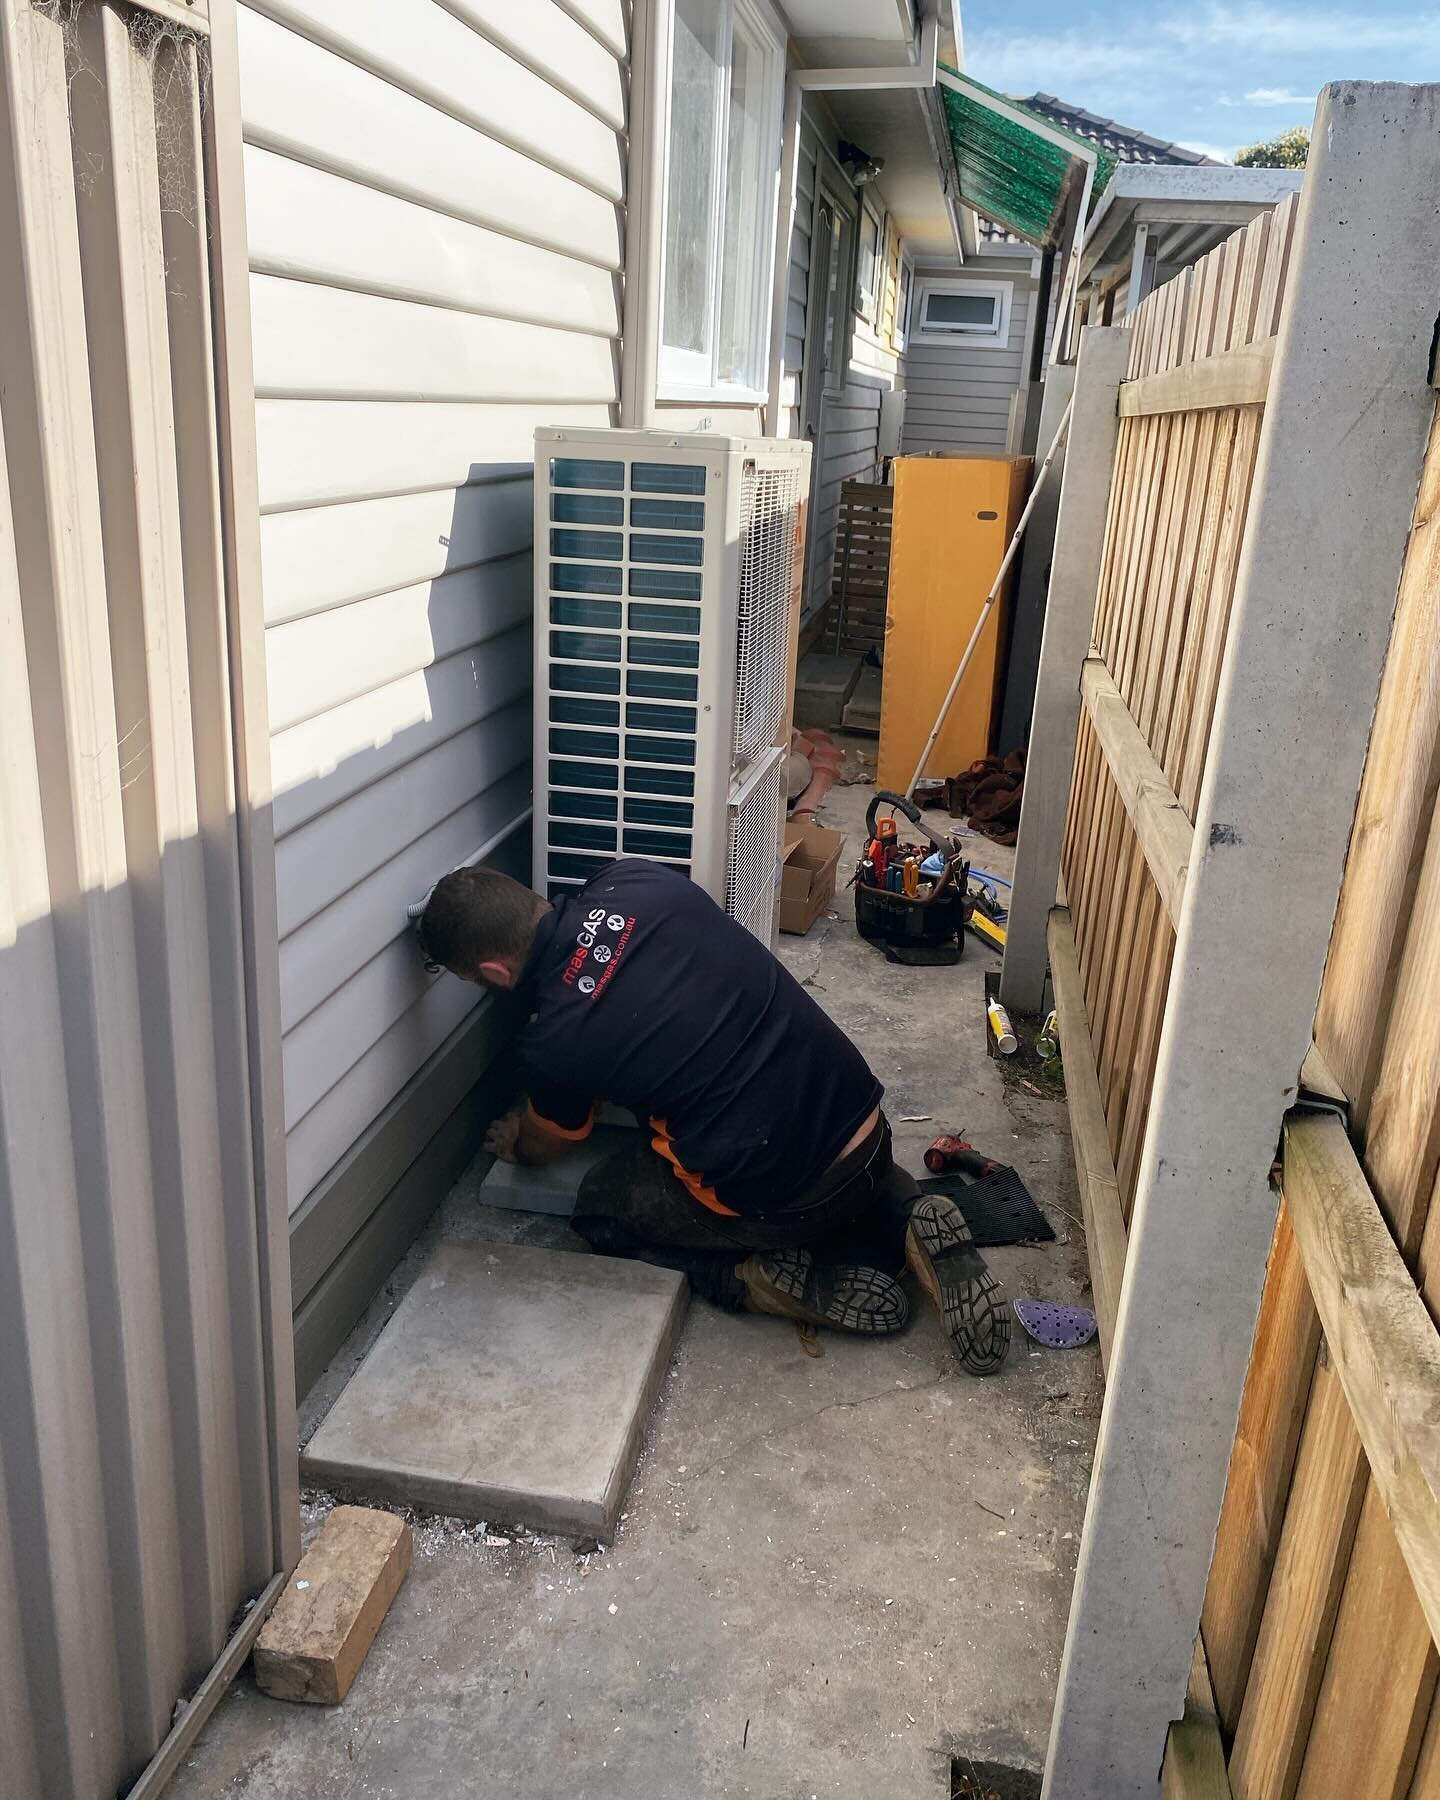 Ducted reverse cycle fit off. Ready for a hot summer! 🌞 ⁣
⁣
⁣
#reversecycle #summerready #melbourne